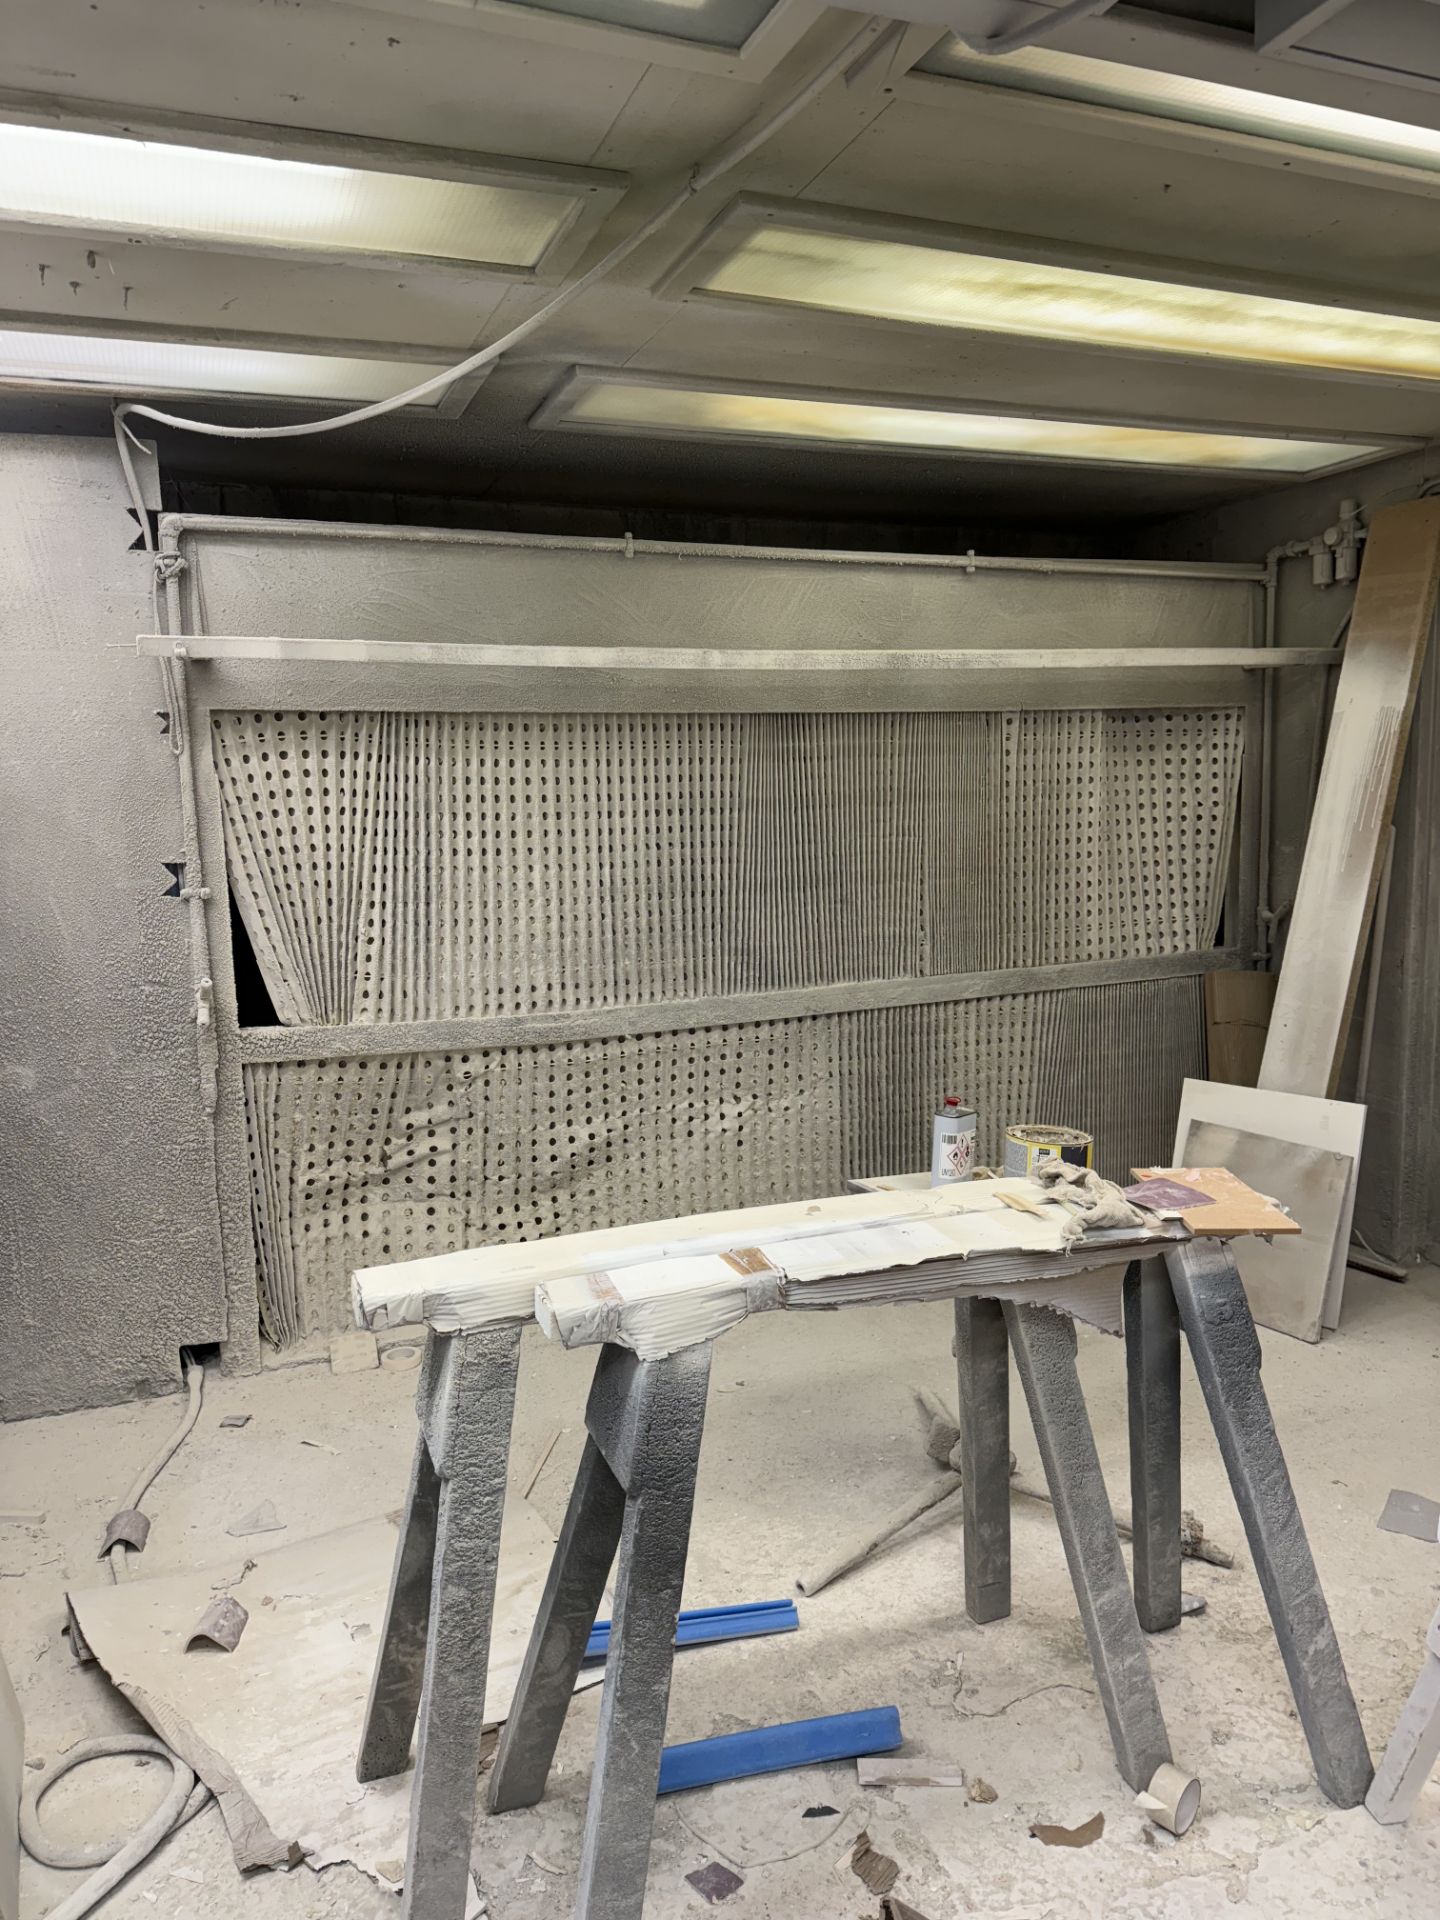 G-Tec Dry Back 3.4 x 2.2 Spray Booth ( Inc Extractor fans) - Image 2 of 3